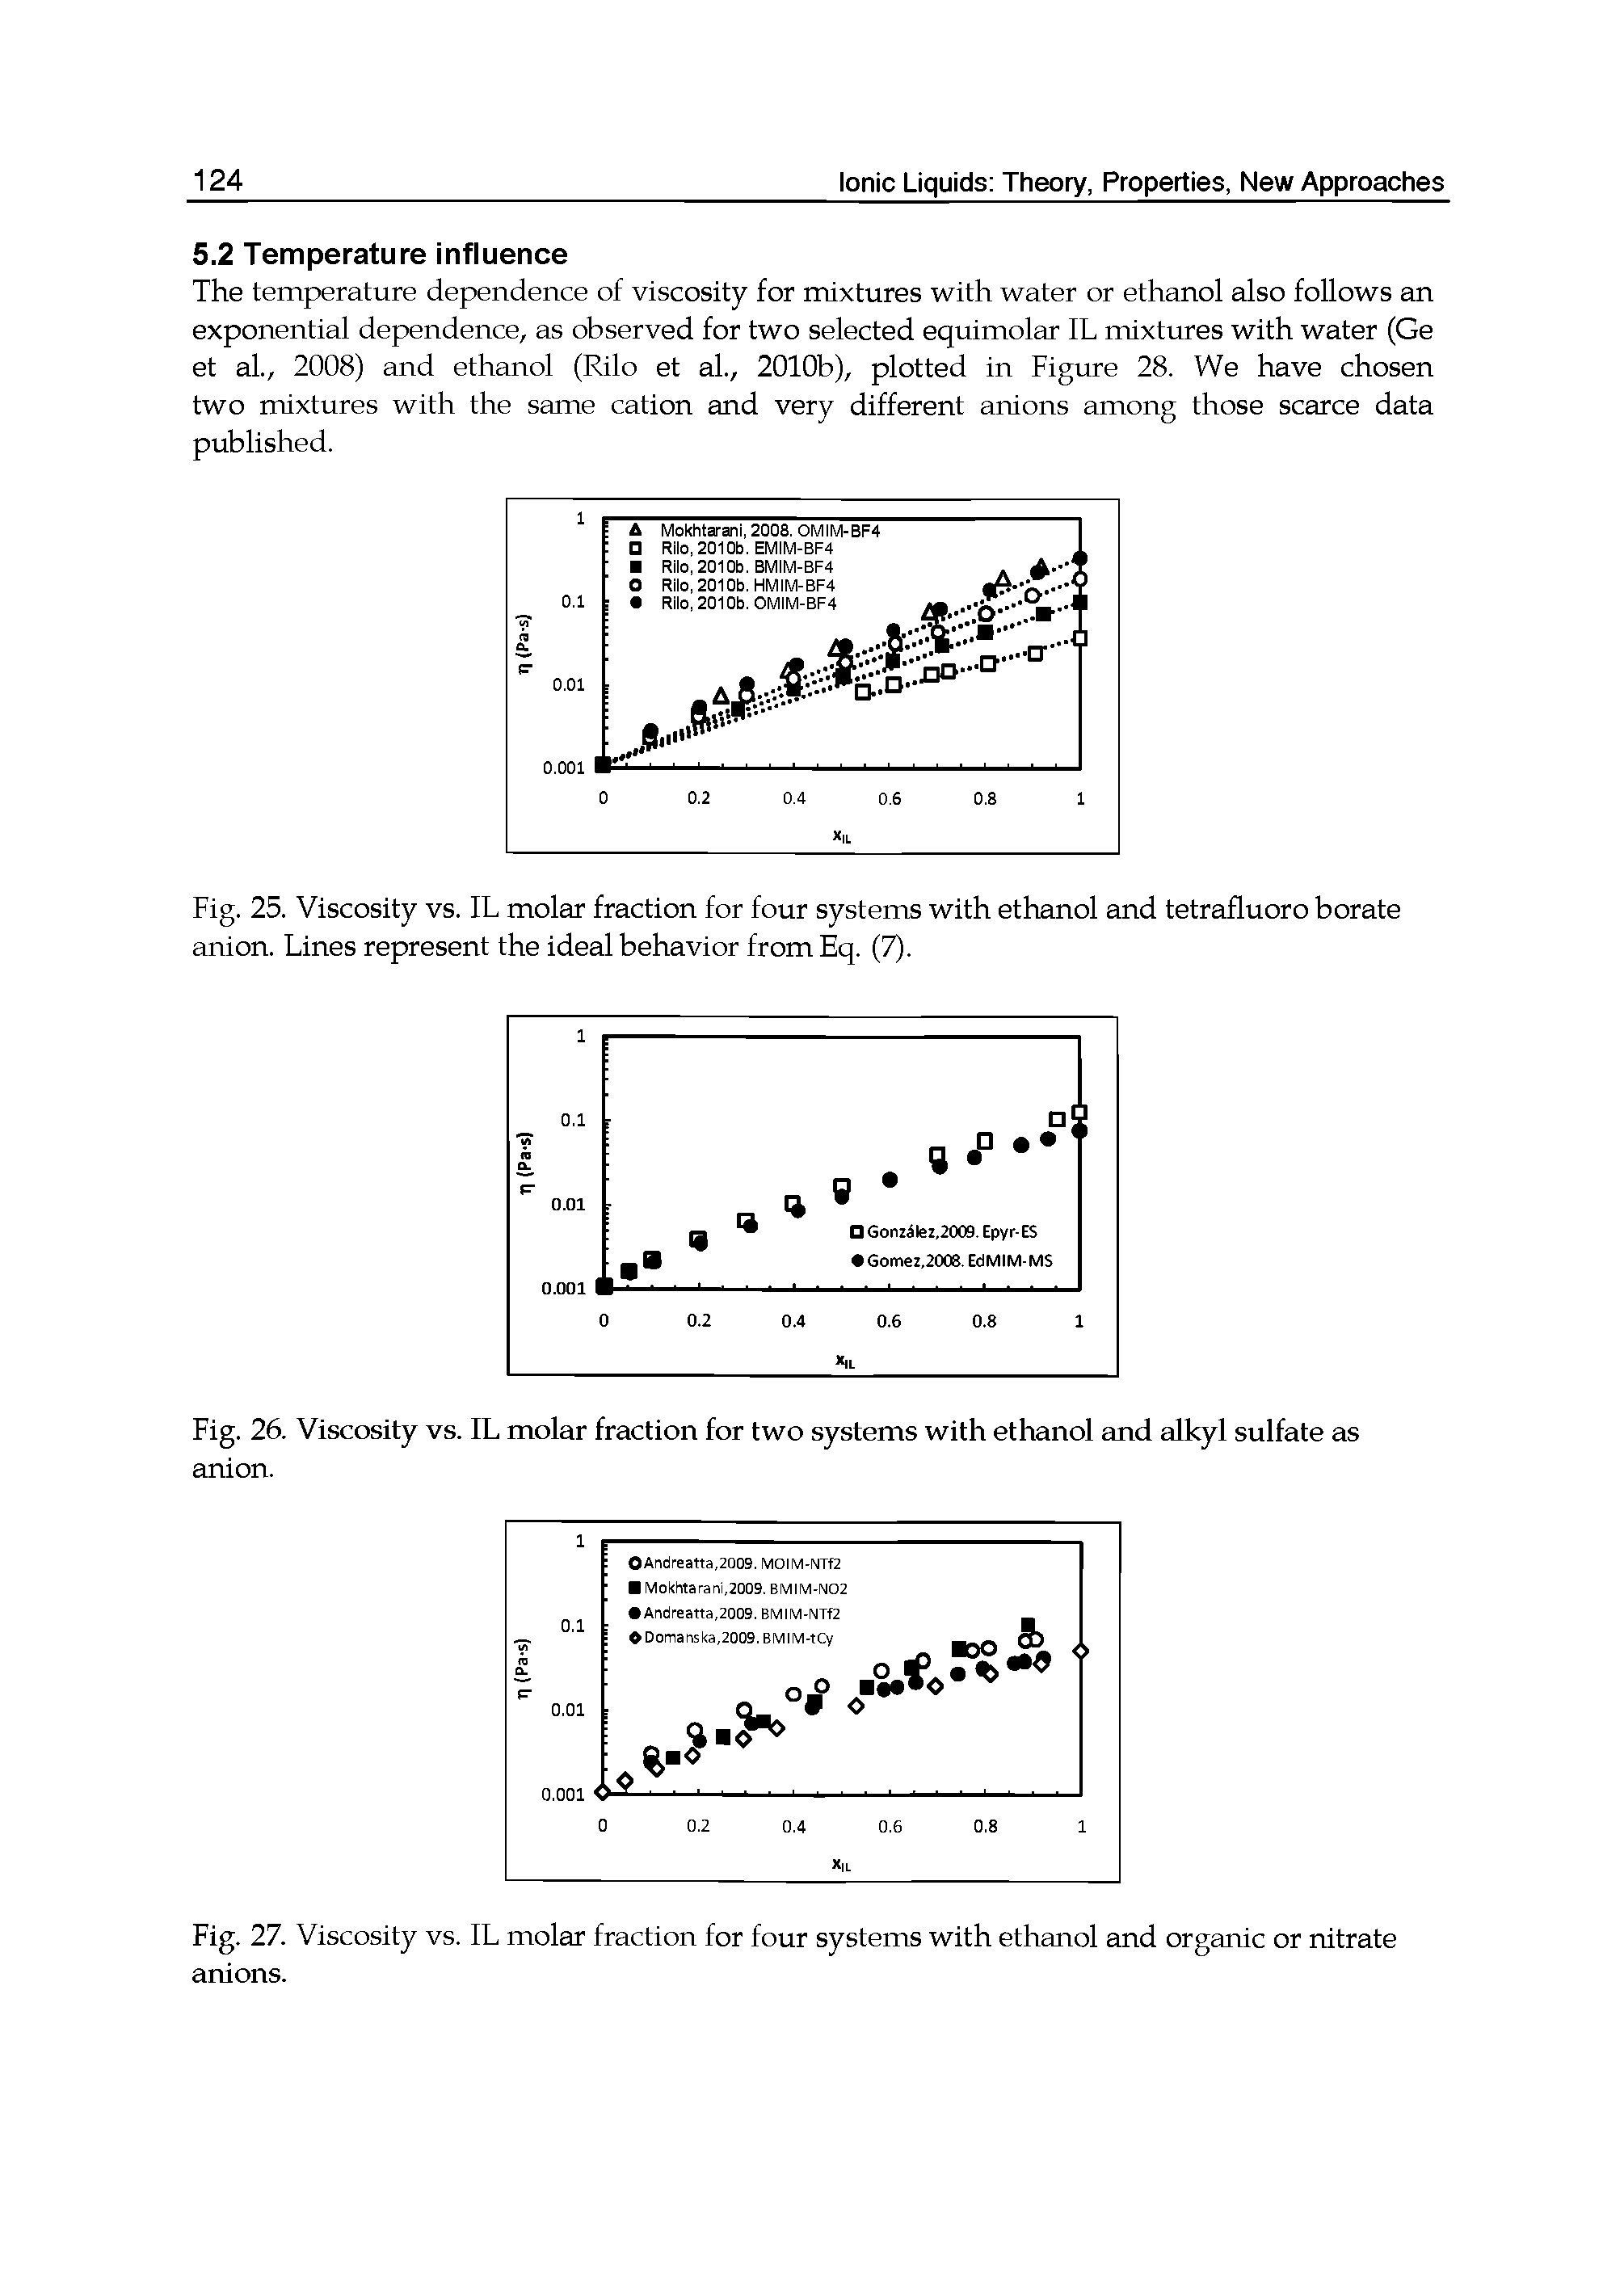 Fig. 27. Viscosity vs. IL molar fraction for four systems with ethanol and organic or nitrate anions.